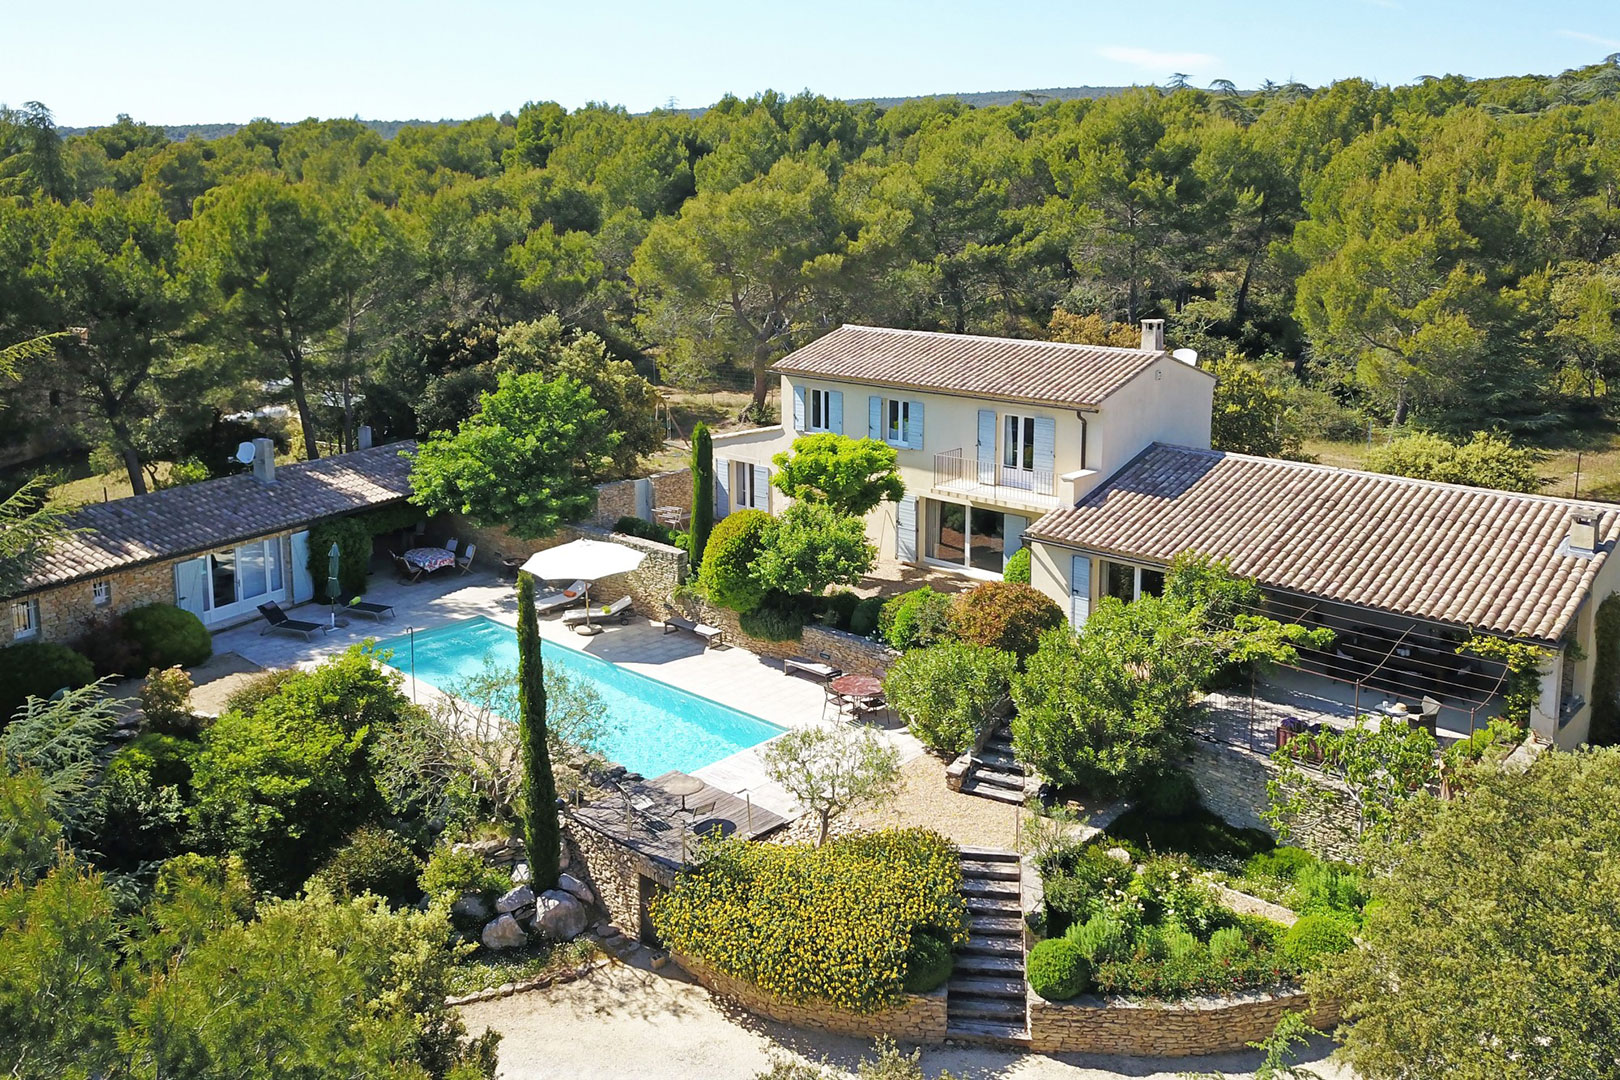 Villa with pool and guest house in Cabrières d'Avignon